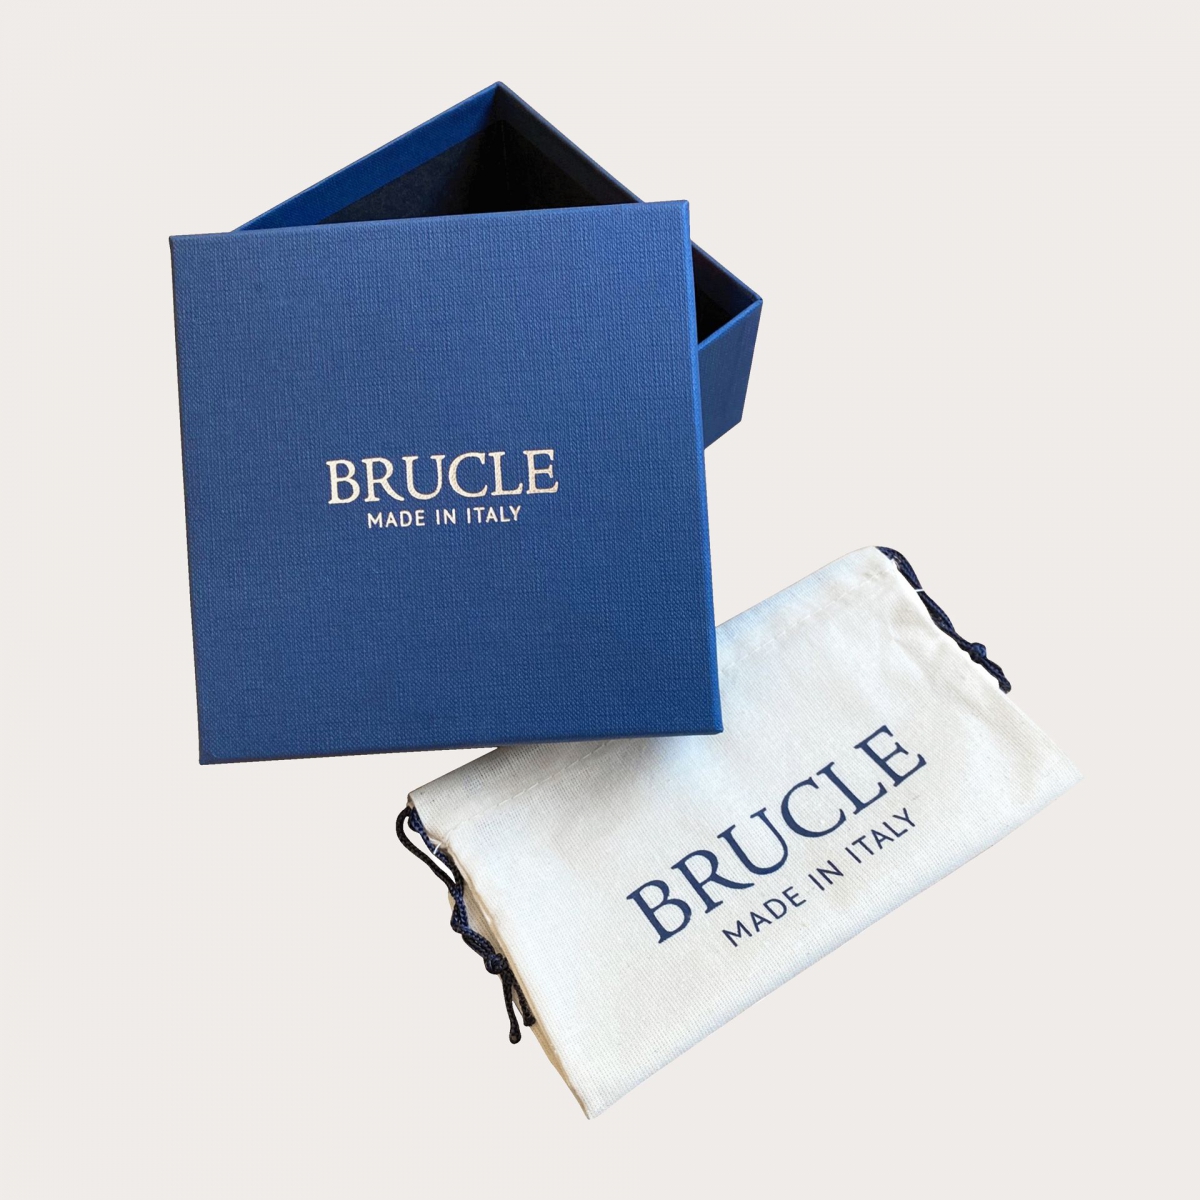 BRUCLE Genuine leather belt with grey braided print